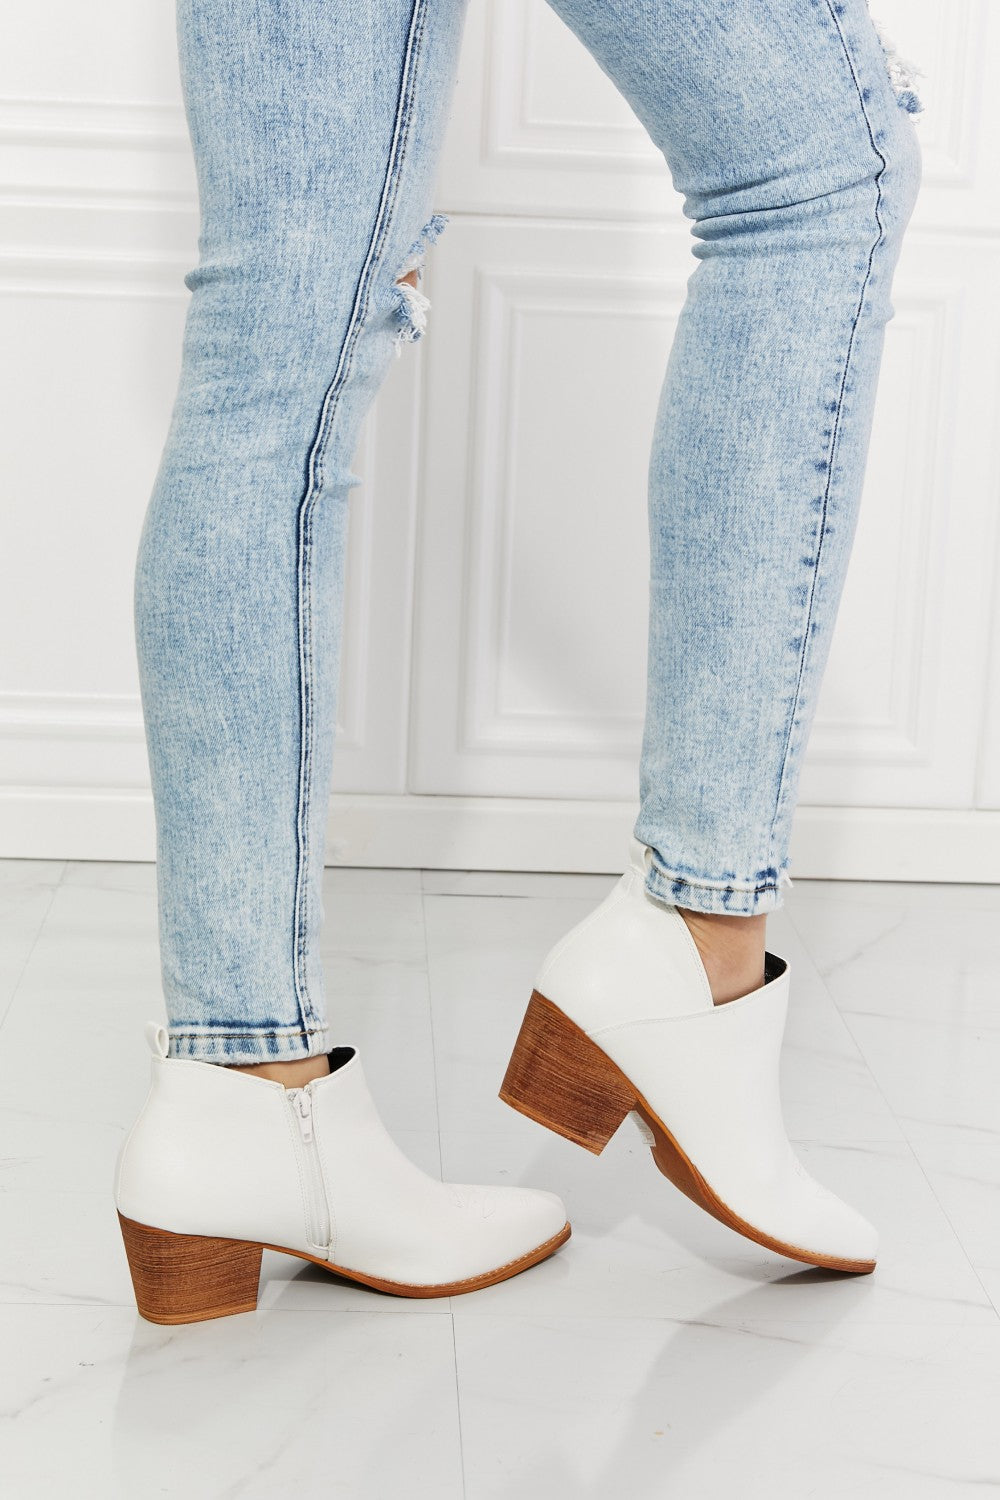 MMShoes Trust Yourself Embroidered Crossover Cowboy Bootie in White - AllIn Computer